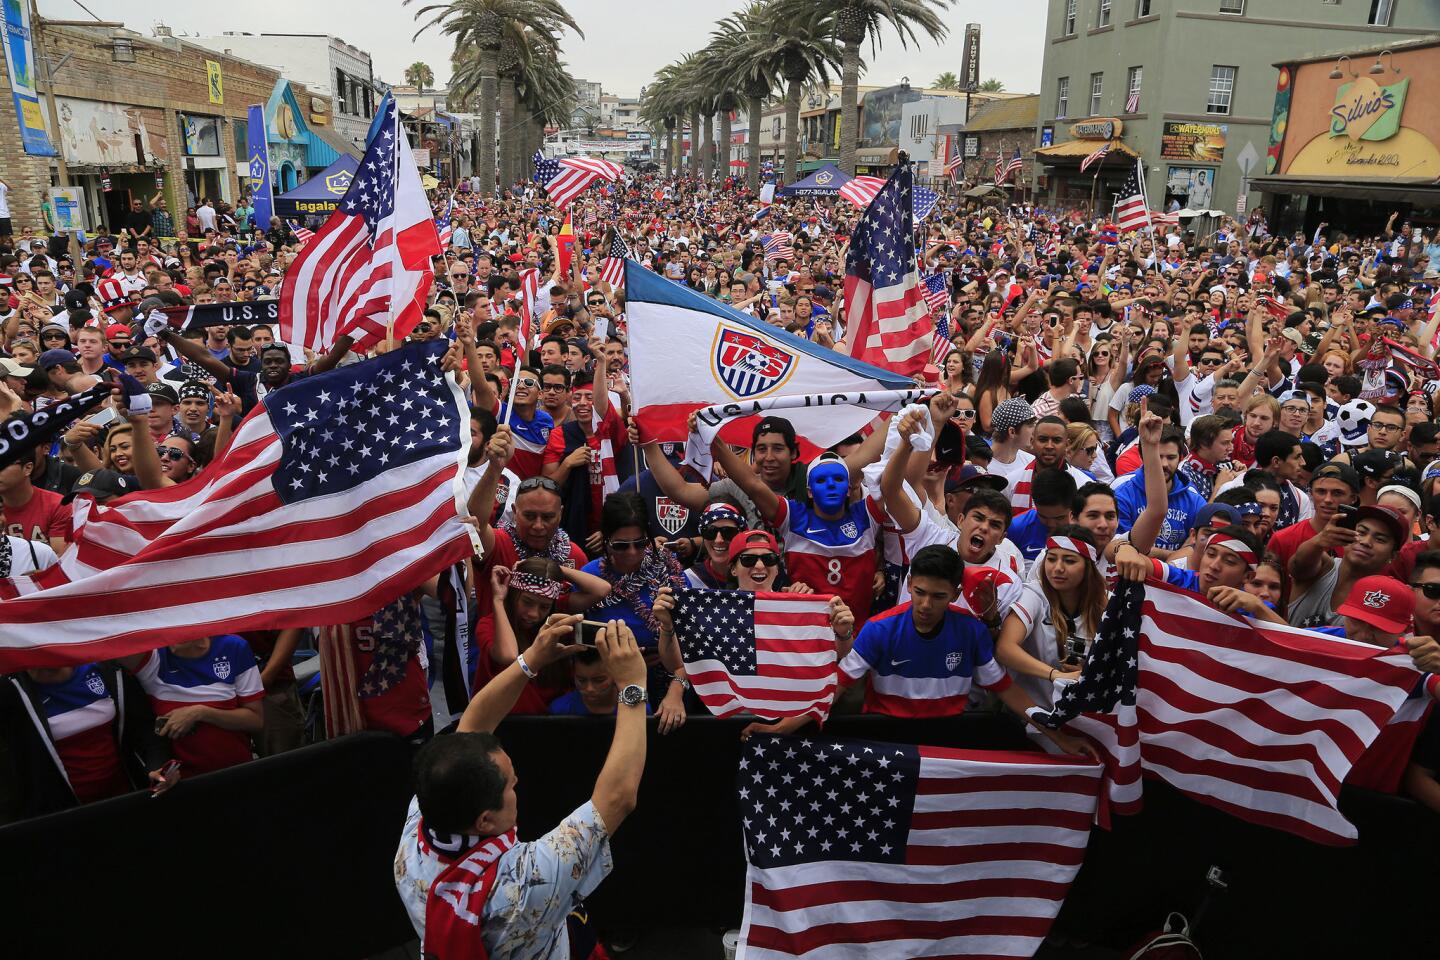 The U.S. national soccer team's 1-0 loss to Germany on Thursday wasn't an ideal outcome for the hundreds of World Cup fans gathered at the Hermosa Beach Pier, but it was tempered by the fact that the U.S. team will still be moving on to the knockout stage.